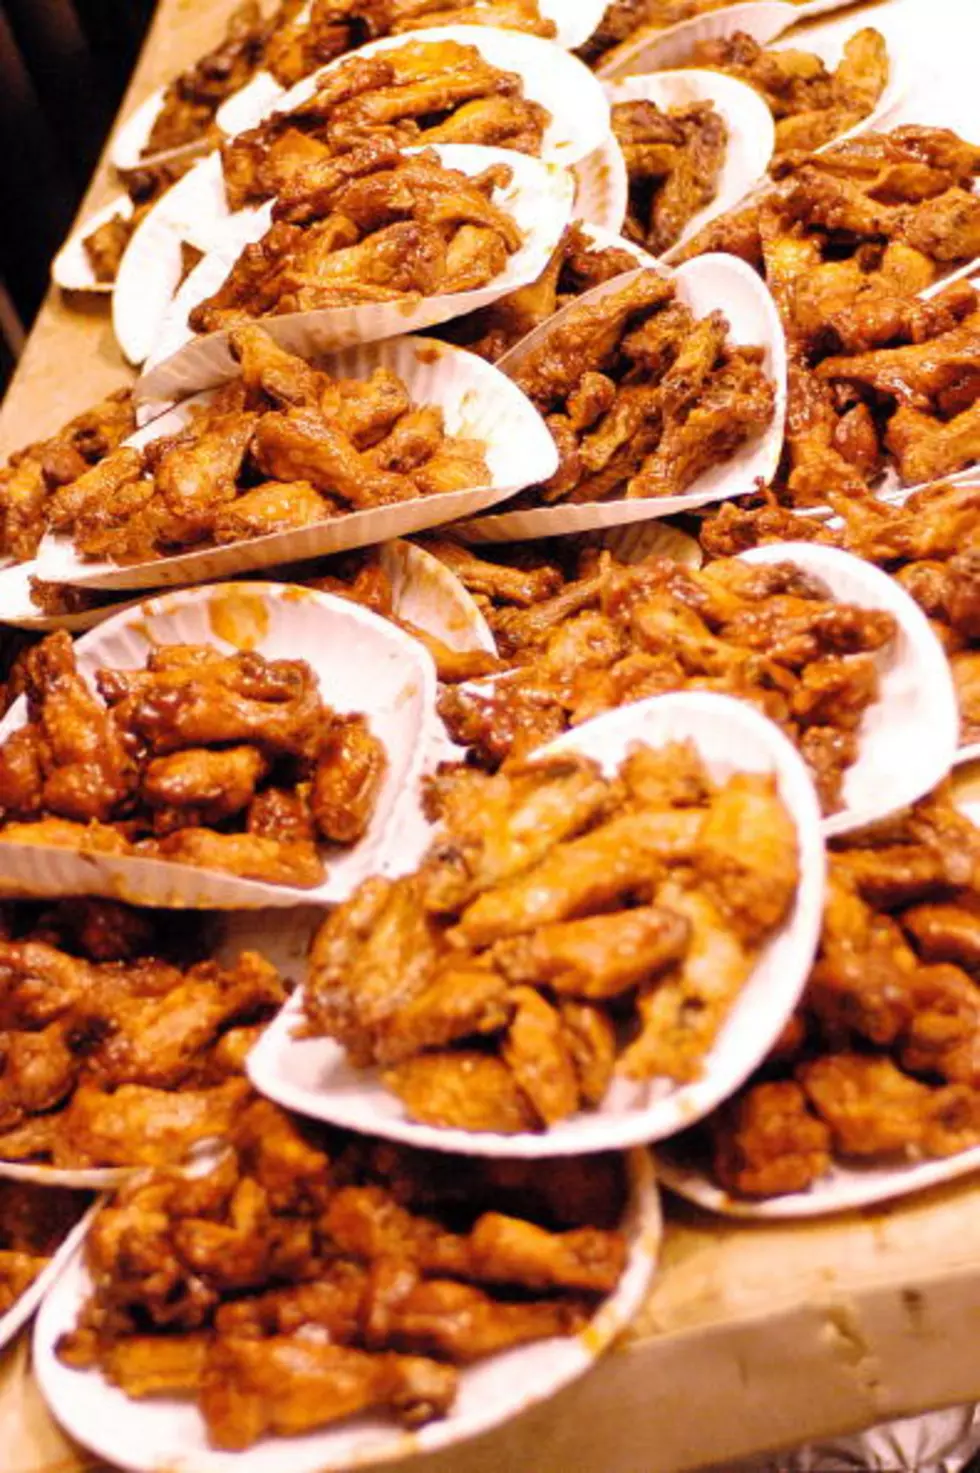 Who Has The Best Wings For The Super Bowl?